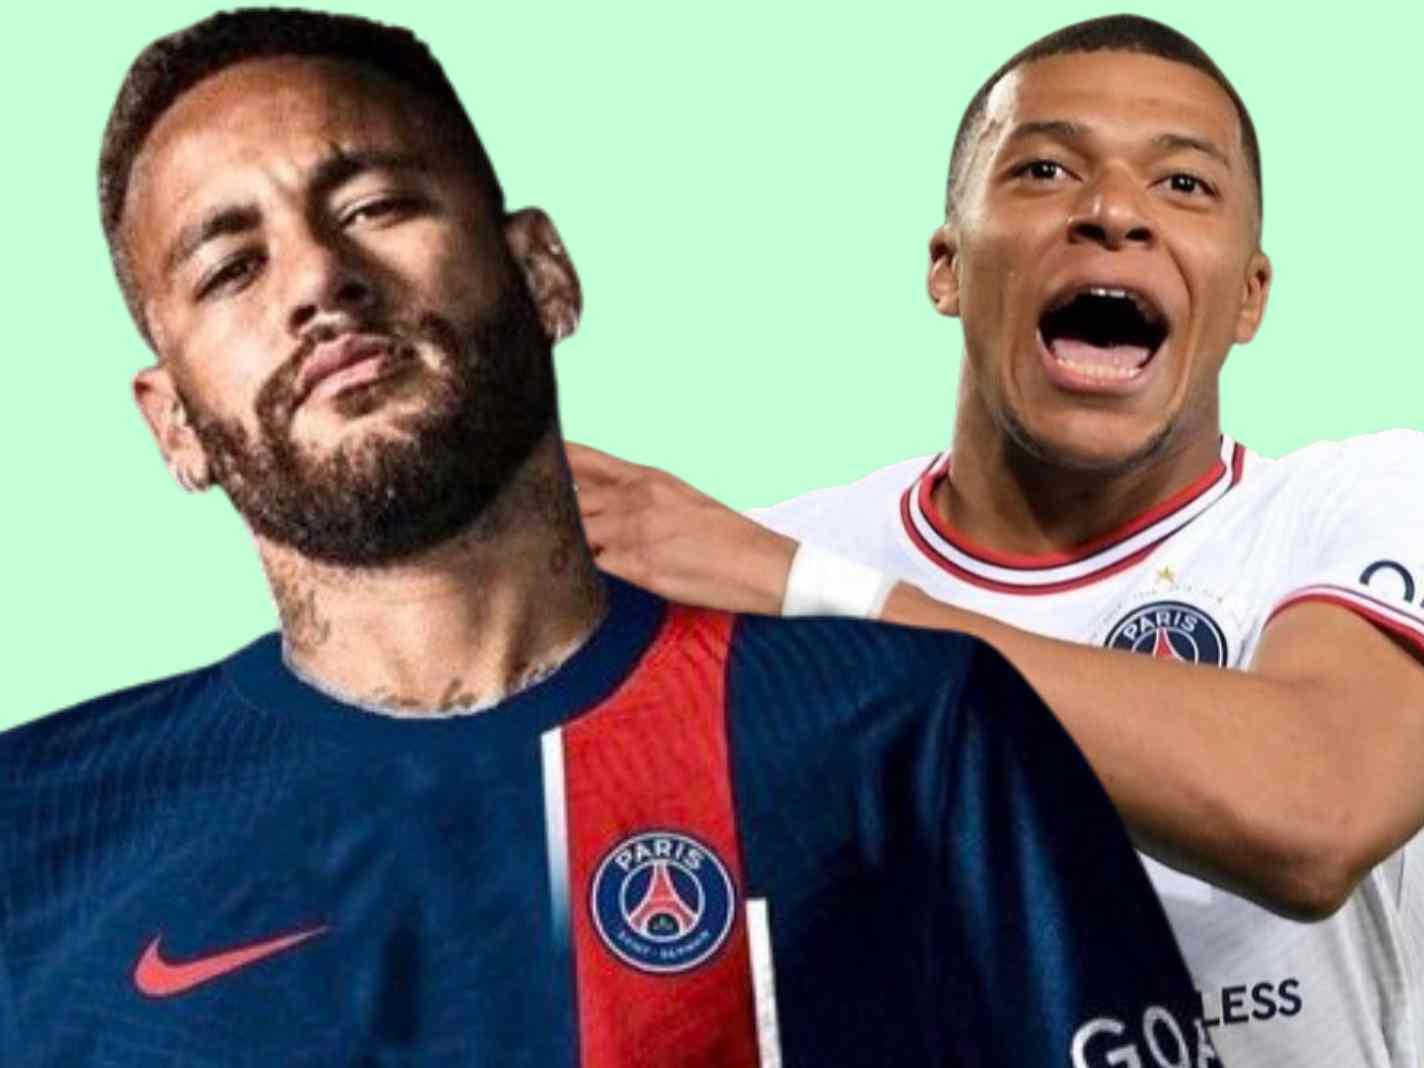 The true story behind Kylian Mbappe and Neymar’s hospital bed photo